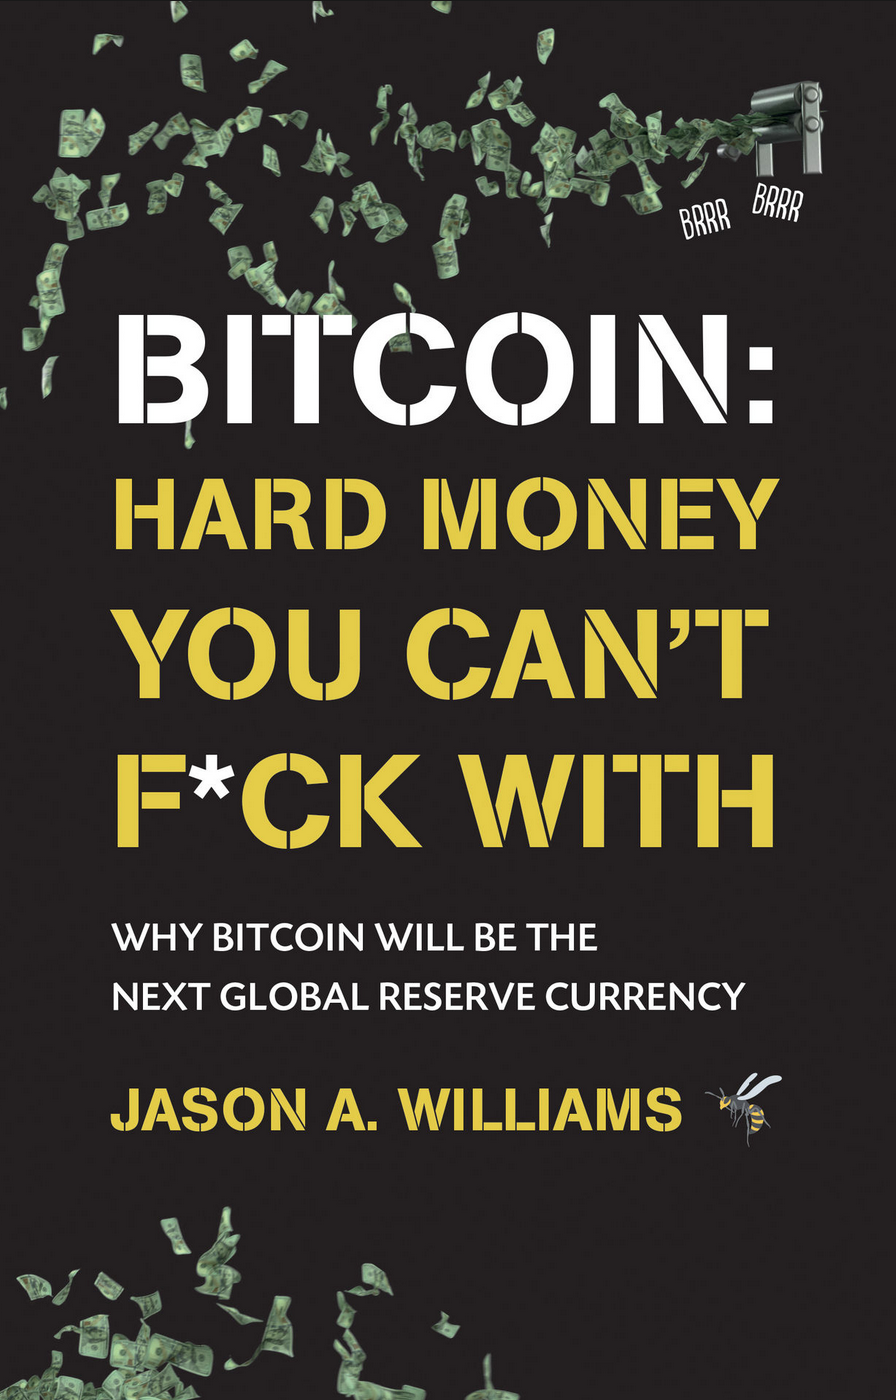 Top 10 Books Recommended by Crypto (#Bitcoin) And Blockchain Thought Leaders